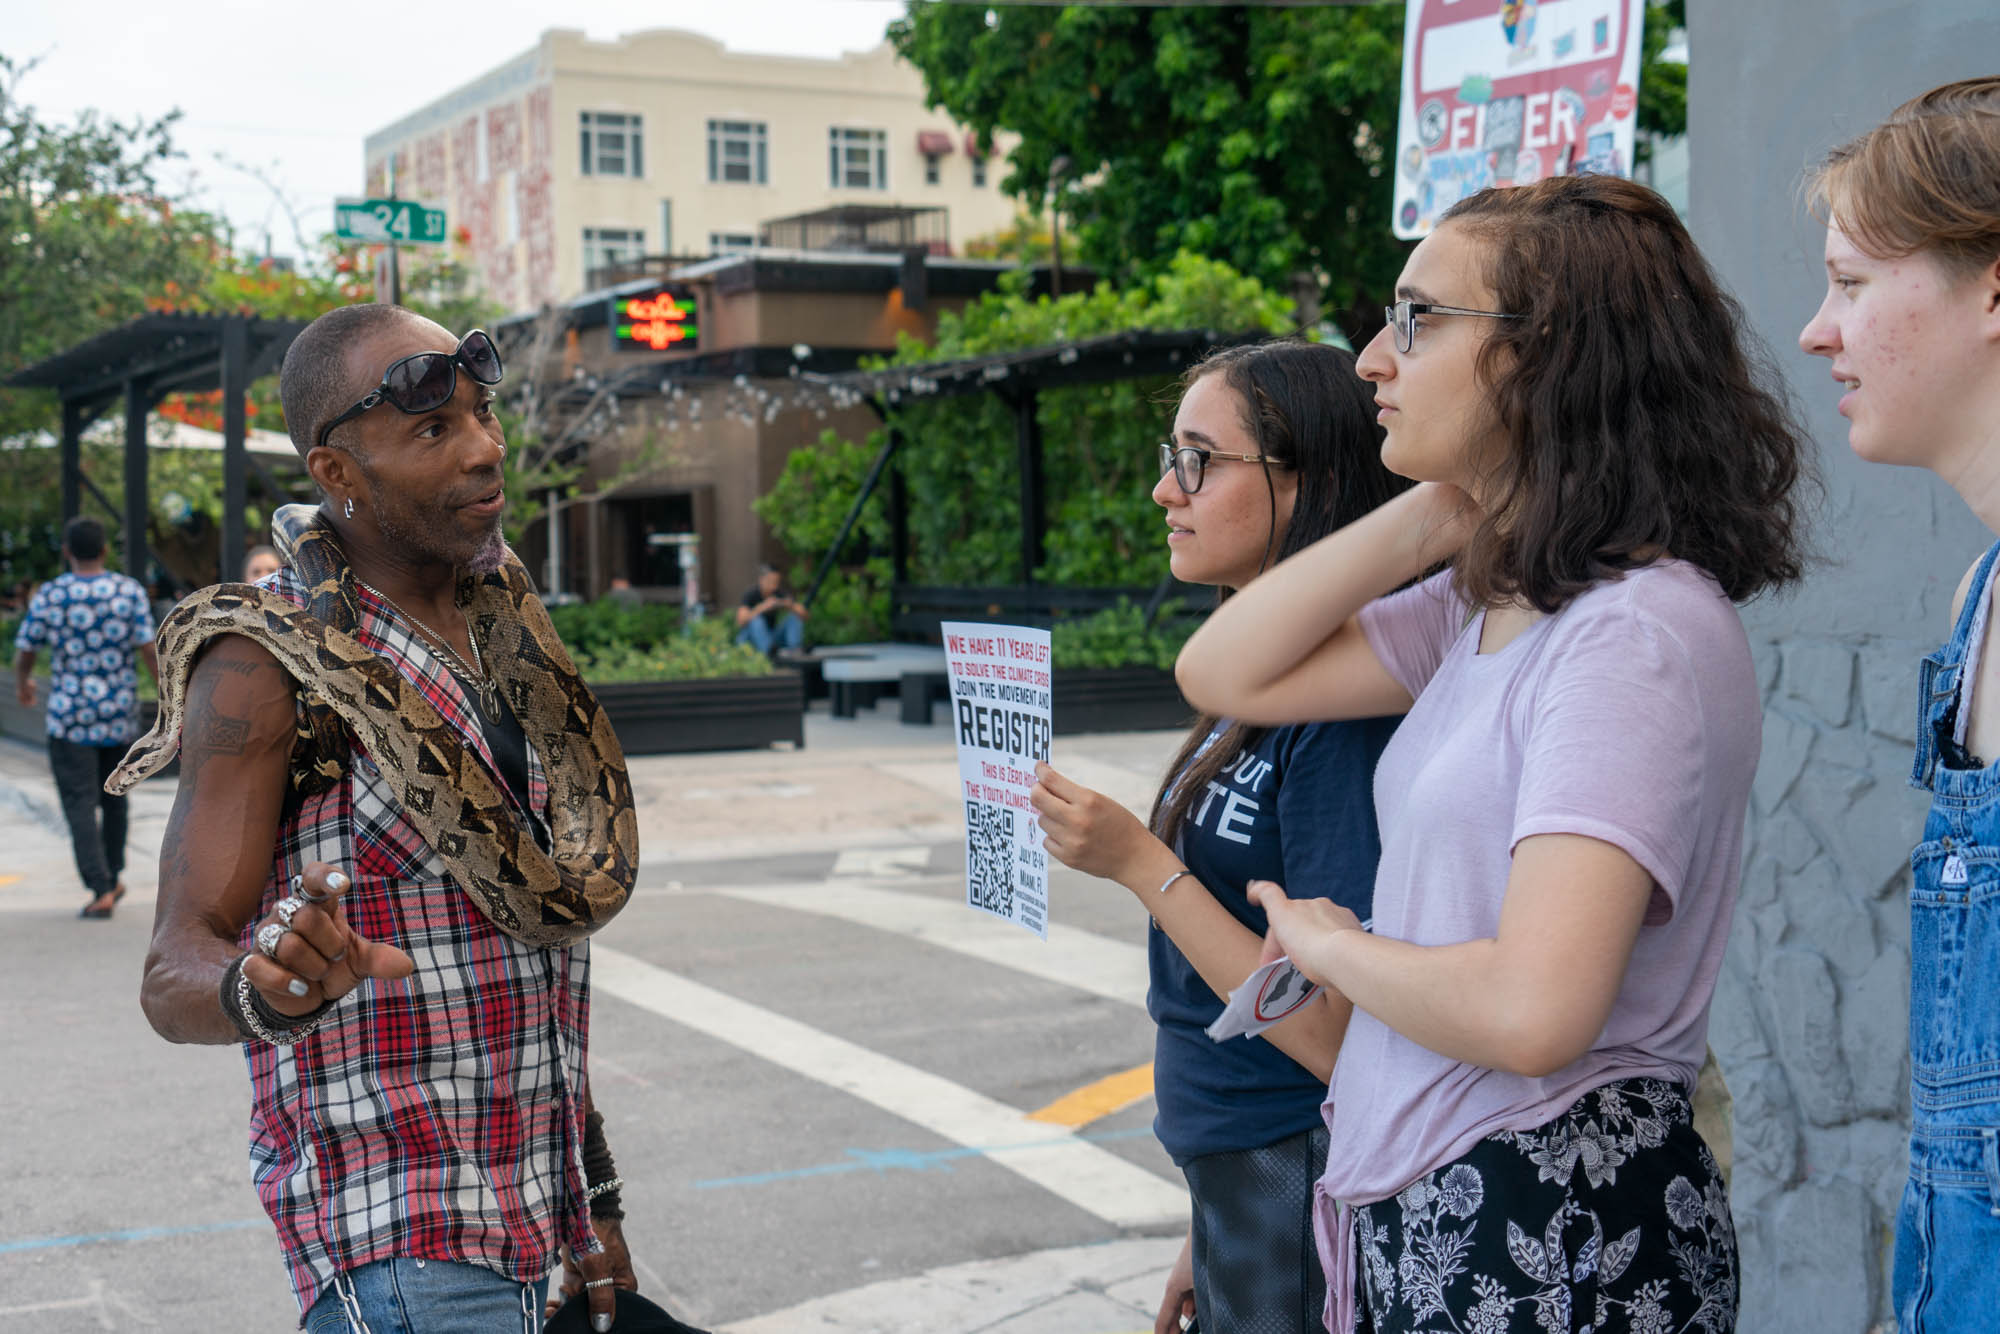 Ray “Fangdaddy” Henry, a street performer in Miami’s Wynwood Walls district, learns about the Youth Climate Summit from Zero Hour activists (from left) Sohayla Eldeeb, Jamie Margolin and Kendall Kieras. (Jordan Laird/News21)